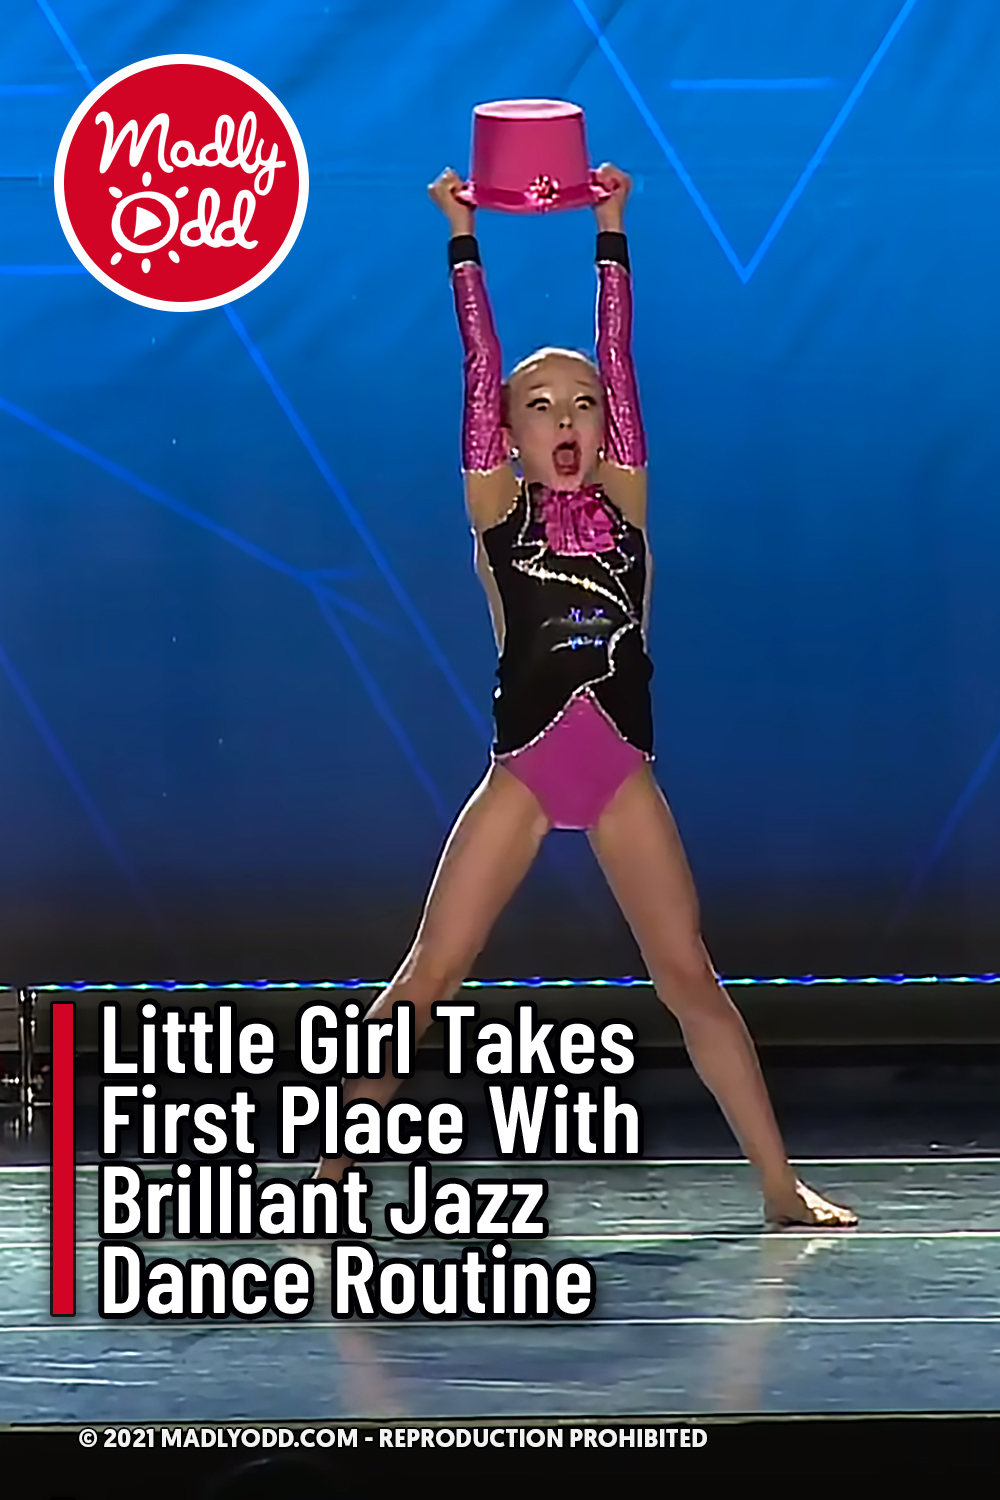 Little Girl Takes First Place With Brilliant Jazz Dance Routine